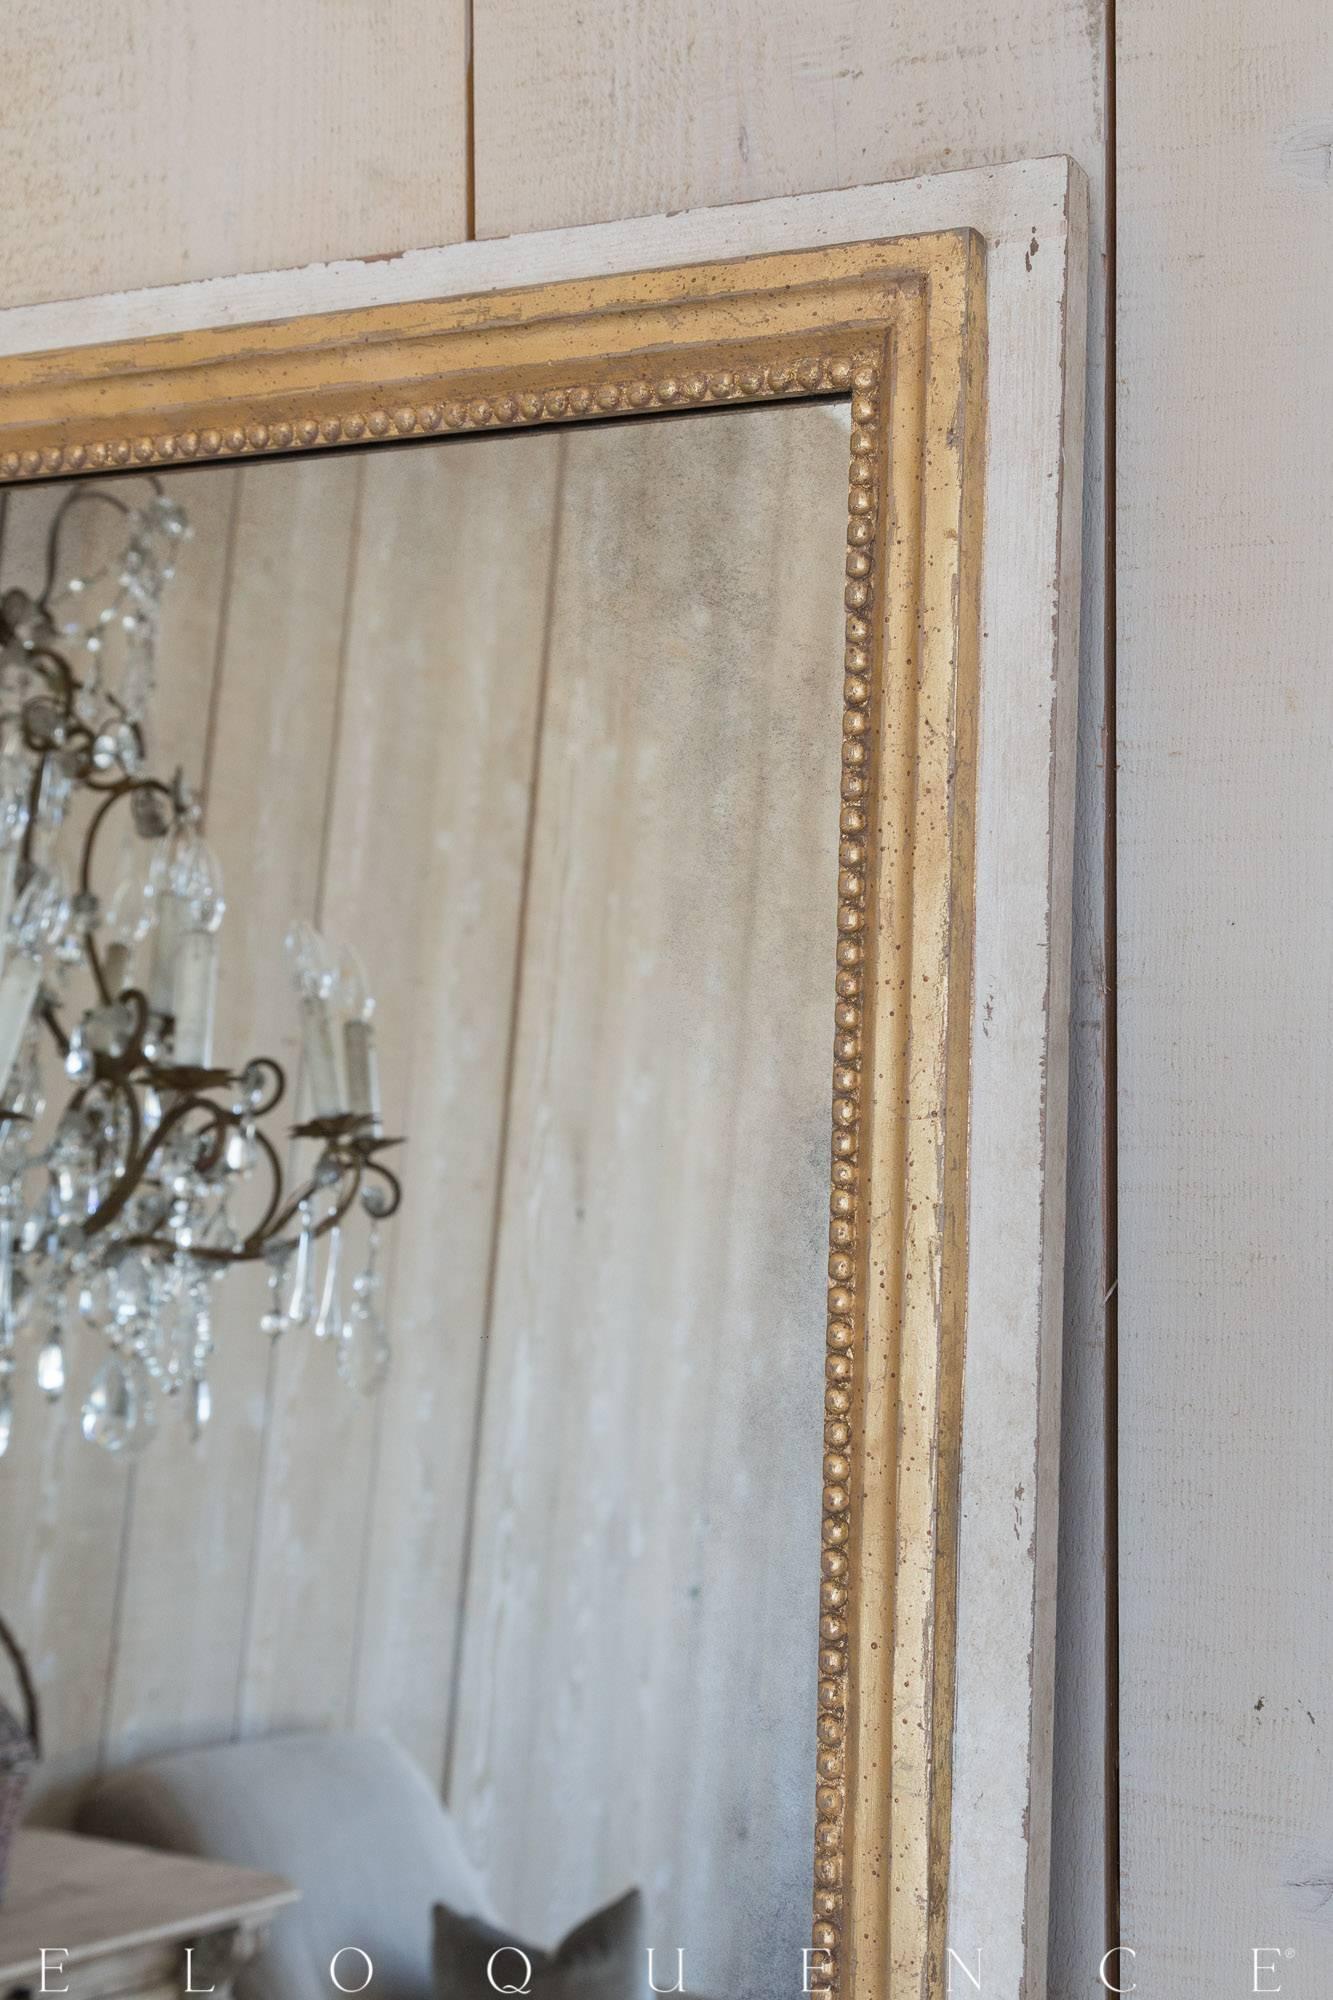 Eloquence® Grande Eugenie Panel Mirror in Toasted Almond. This gorgeous Grande mirror will fill your space with luxury and light. The hand aged glass and hand finished frame are classically designed, with lovely beading adorning the inner edges.